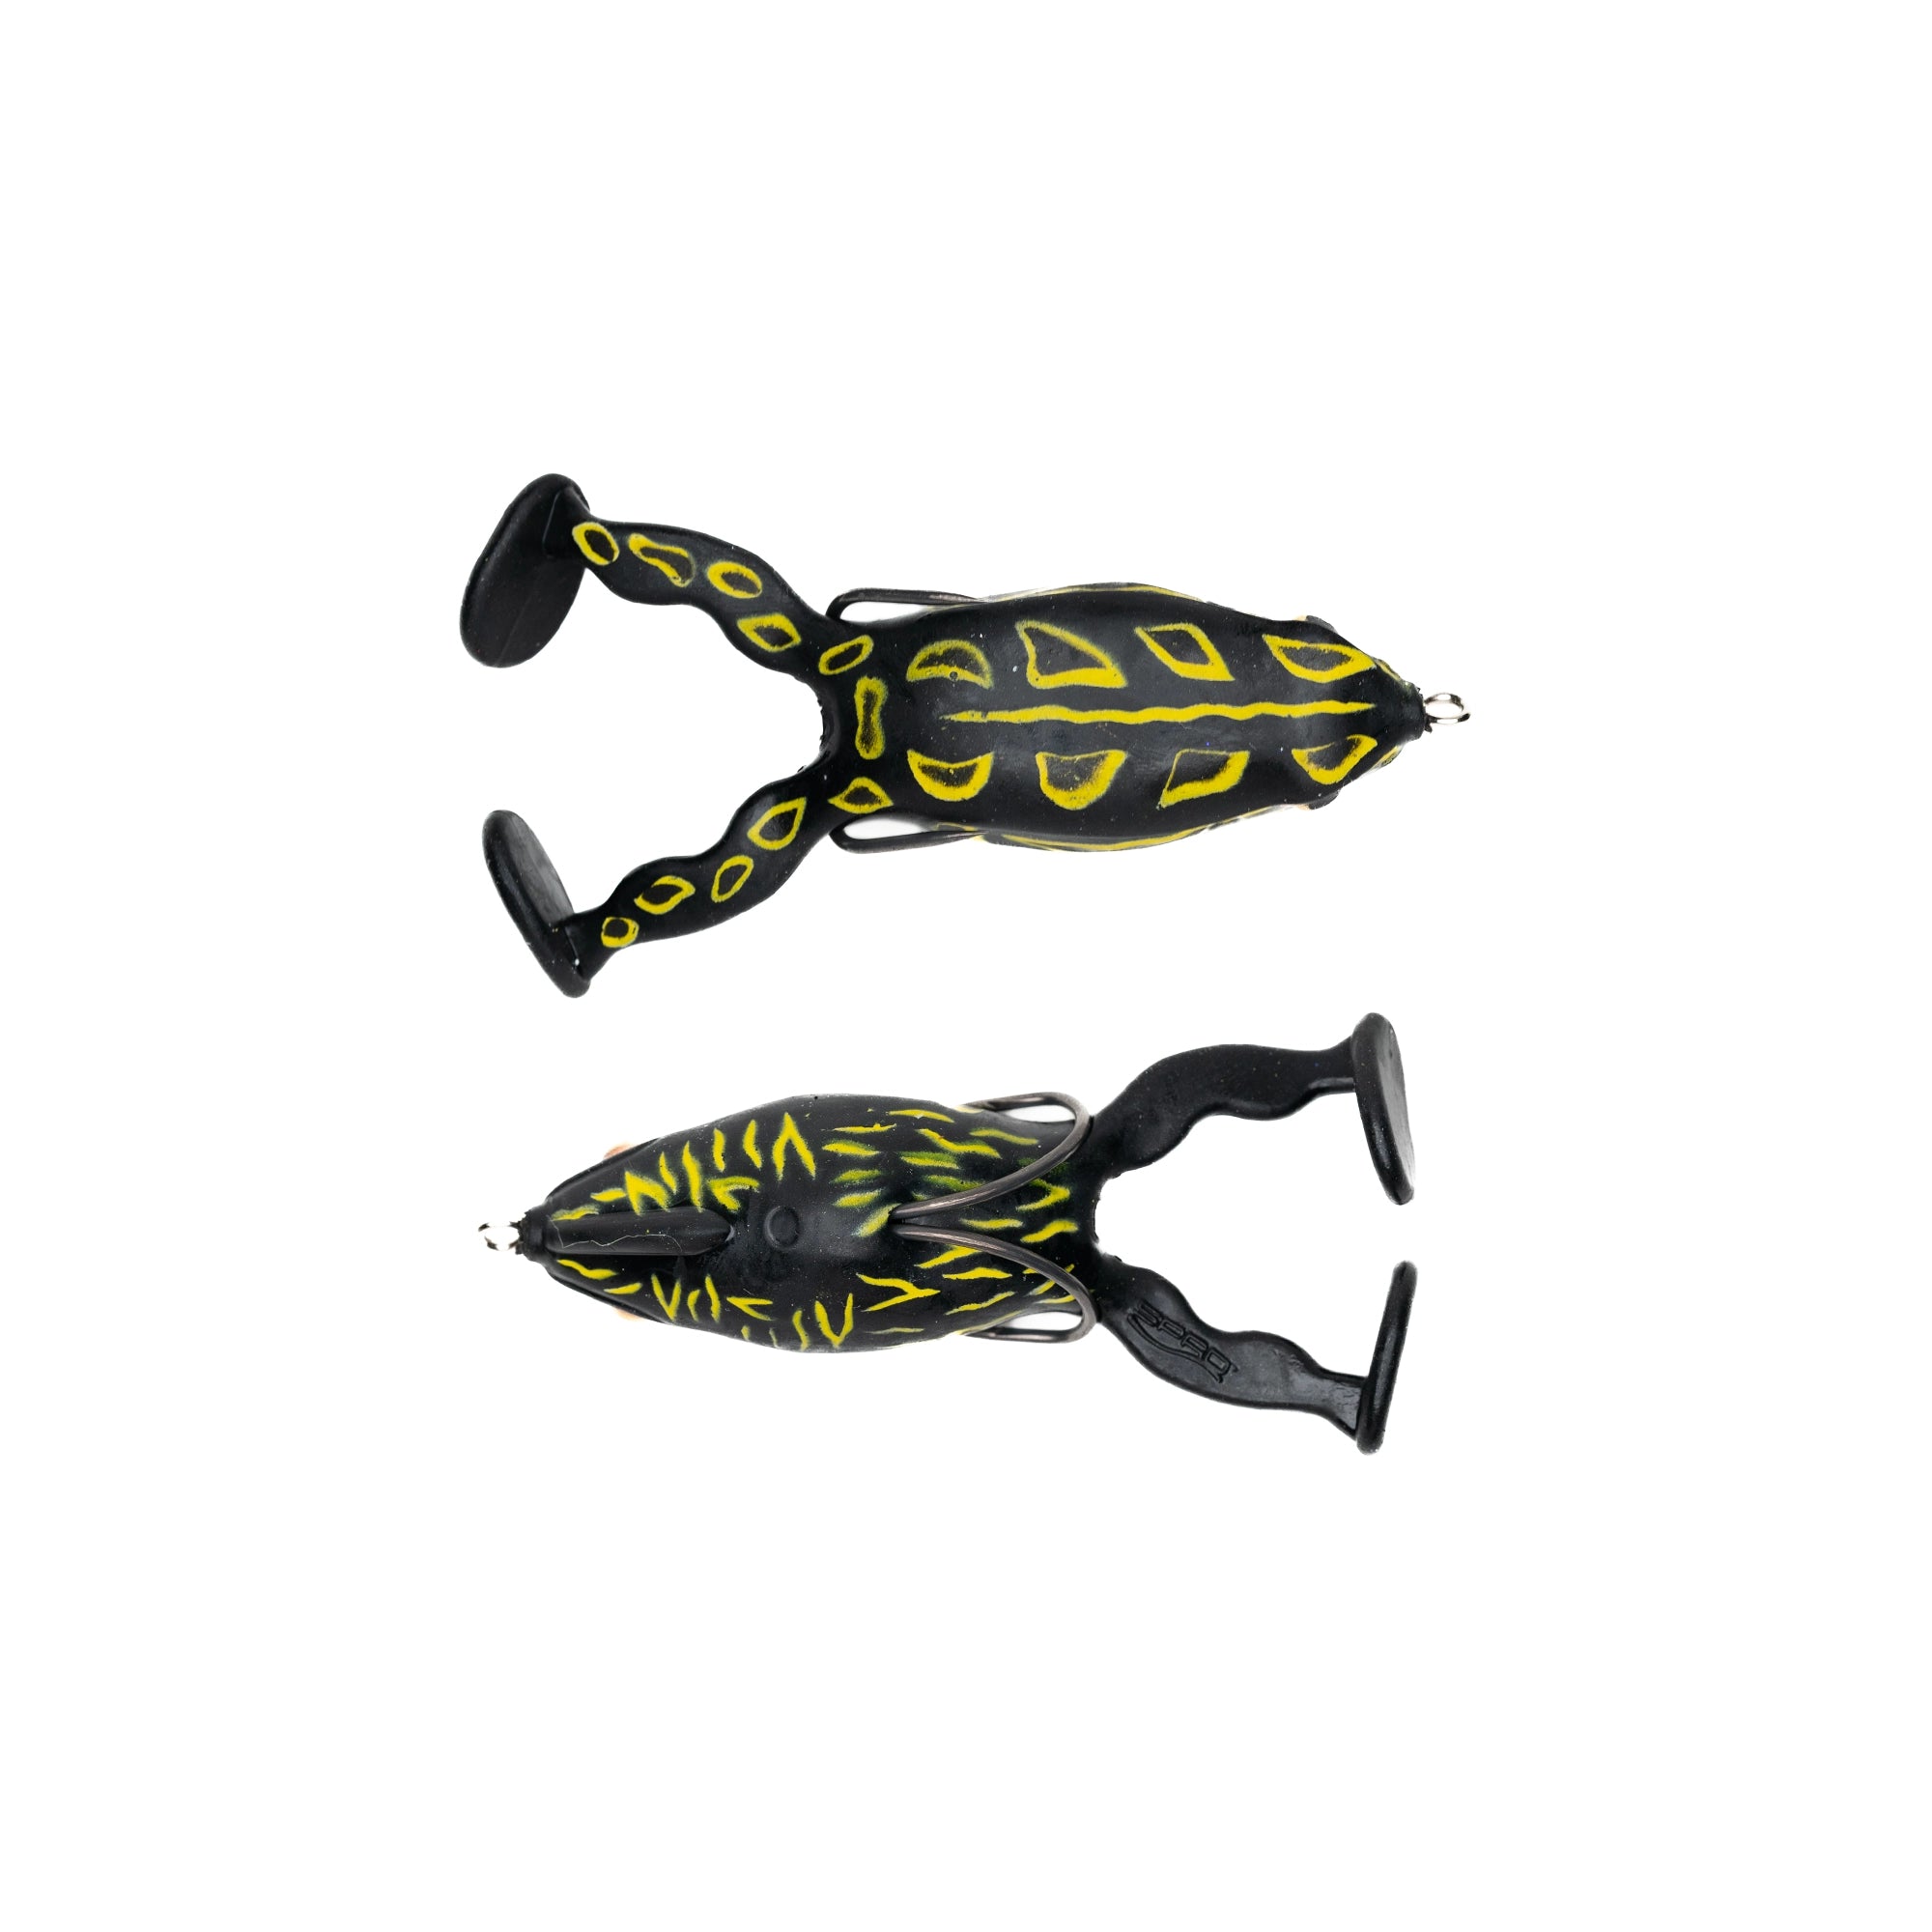 SPRO FLAPPIN FROG 65